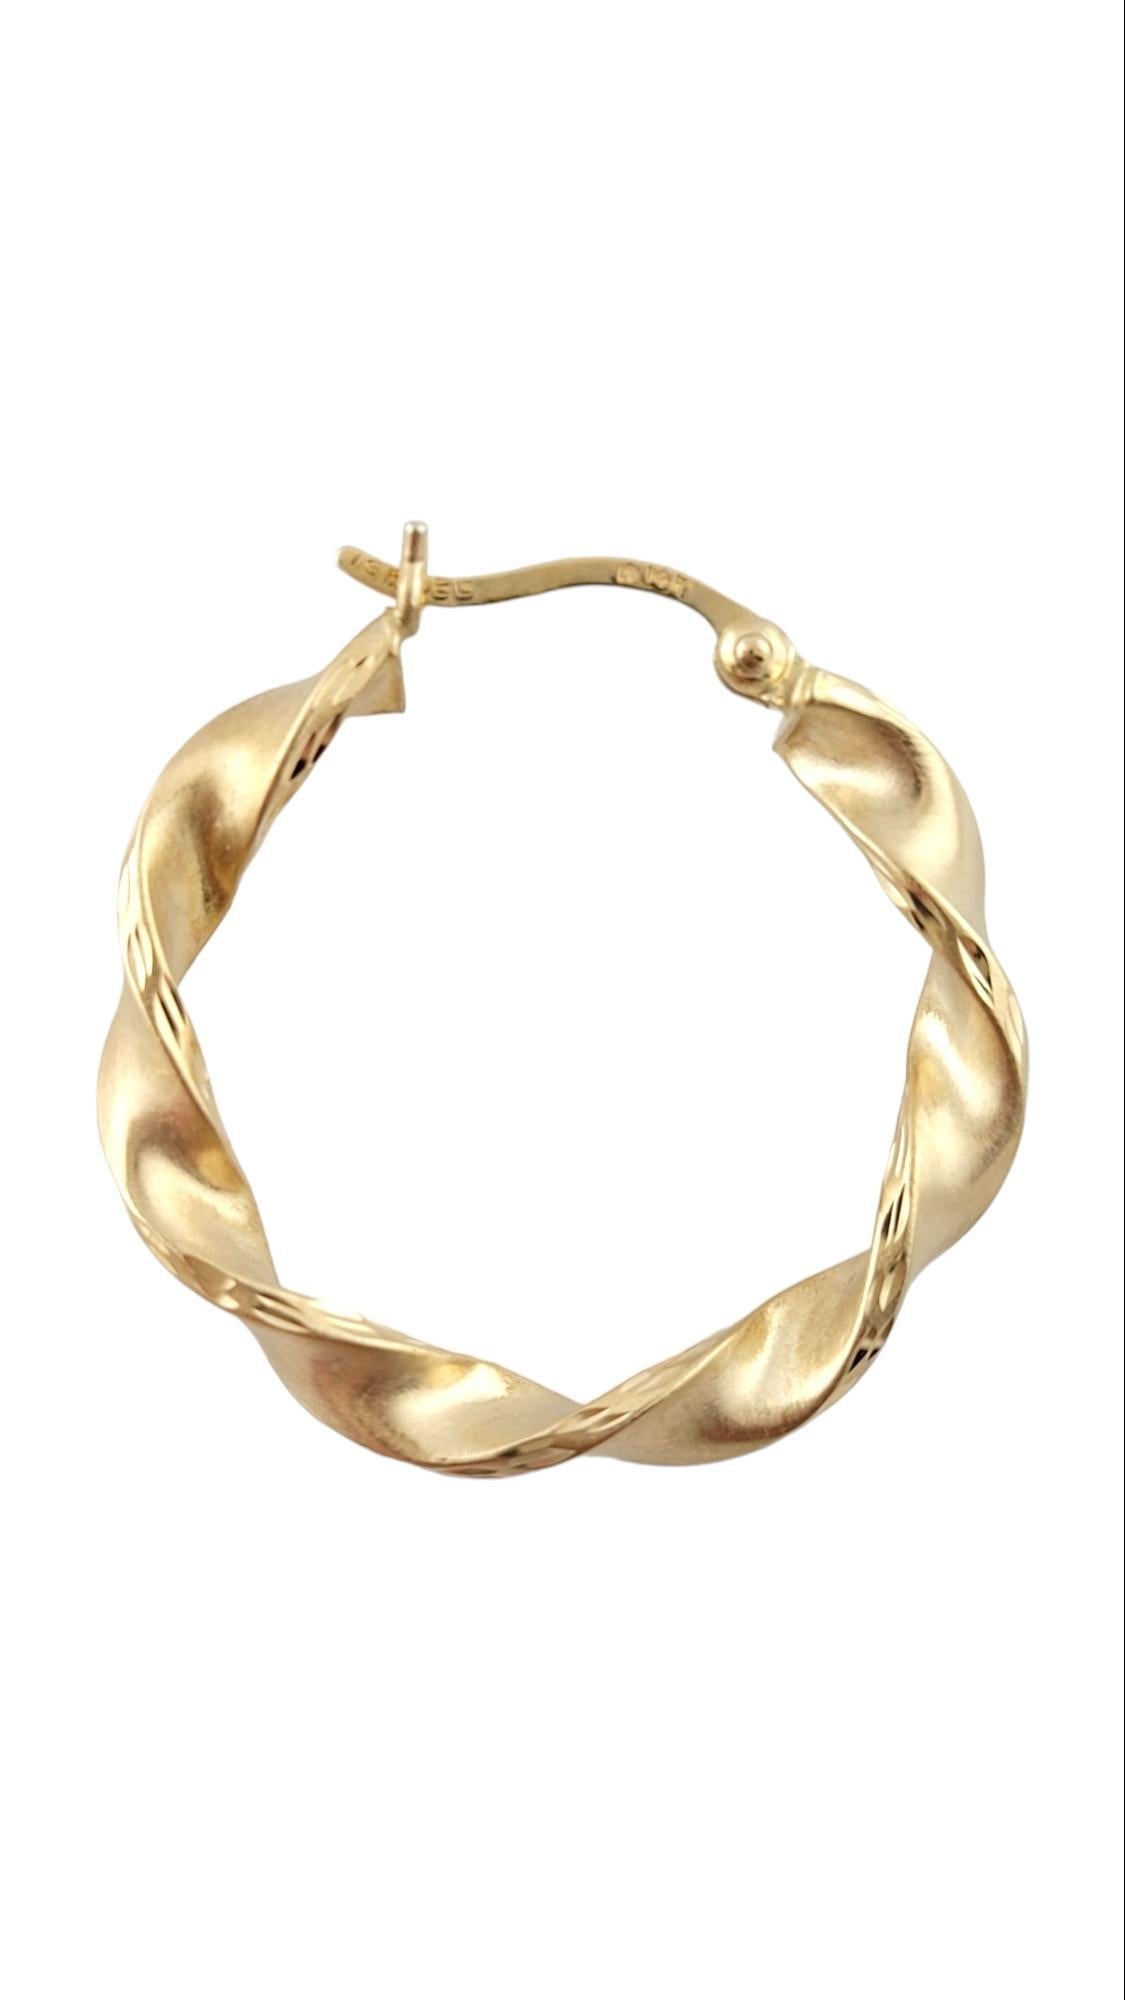 14K Yellow Gold Twisted Hoop Earrings #15900 In Good Condition For Sale In Washington Depot, CT